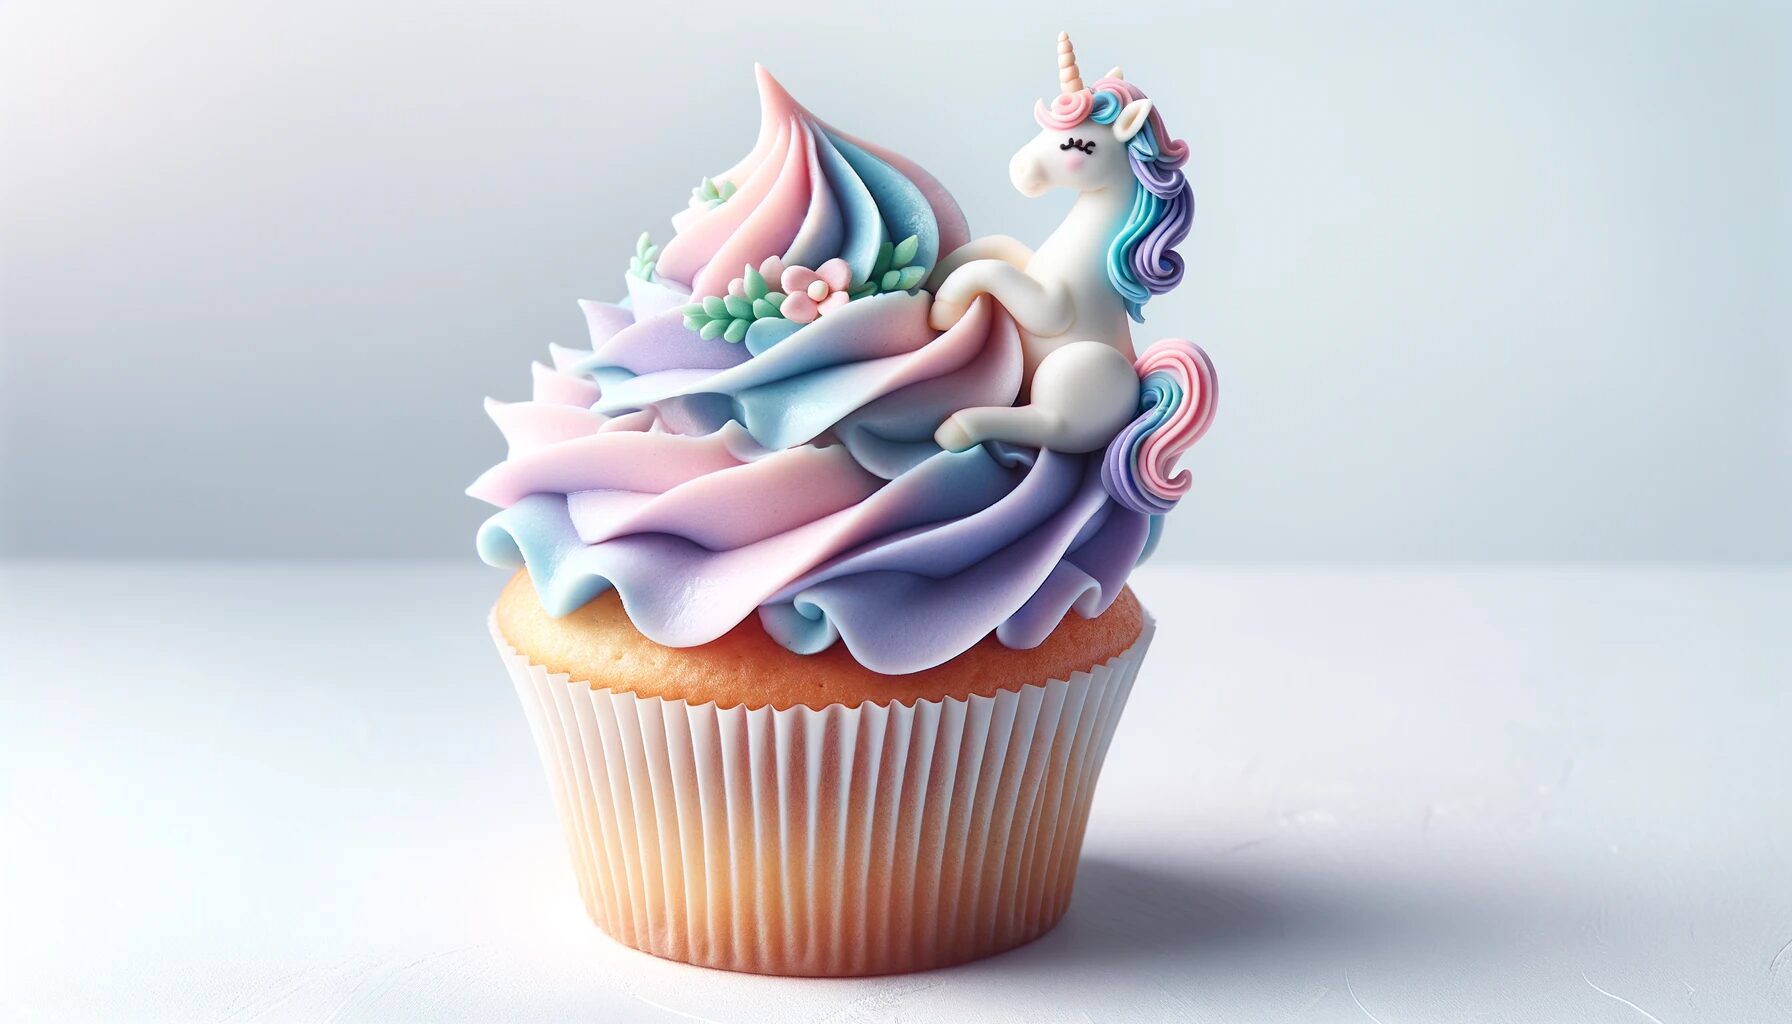 Unicorn Cupcake with Dreamy Pastel Frosting